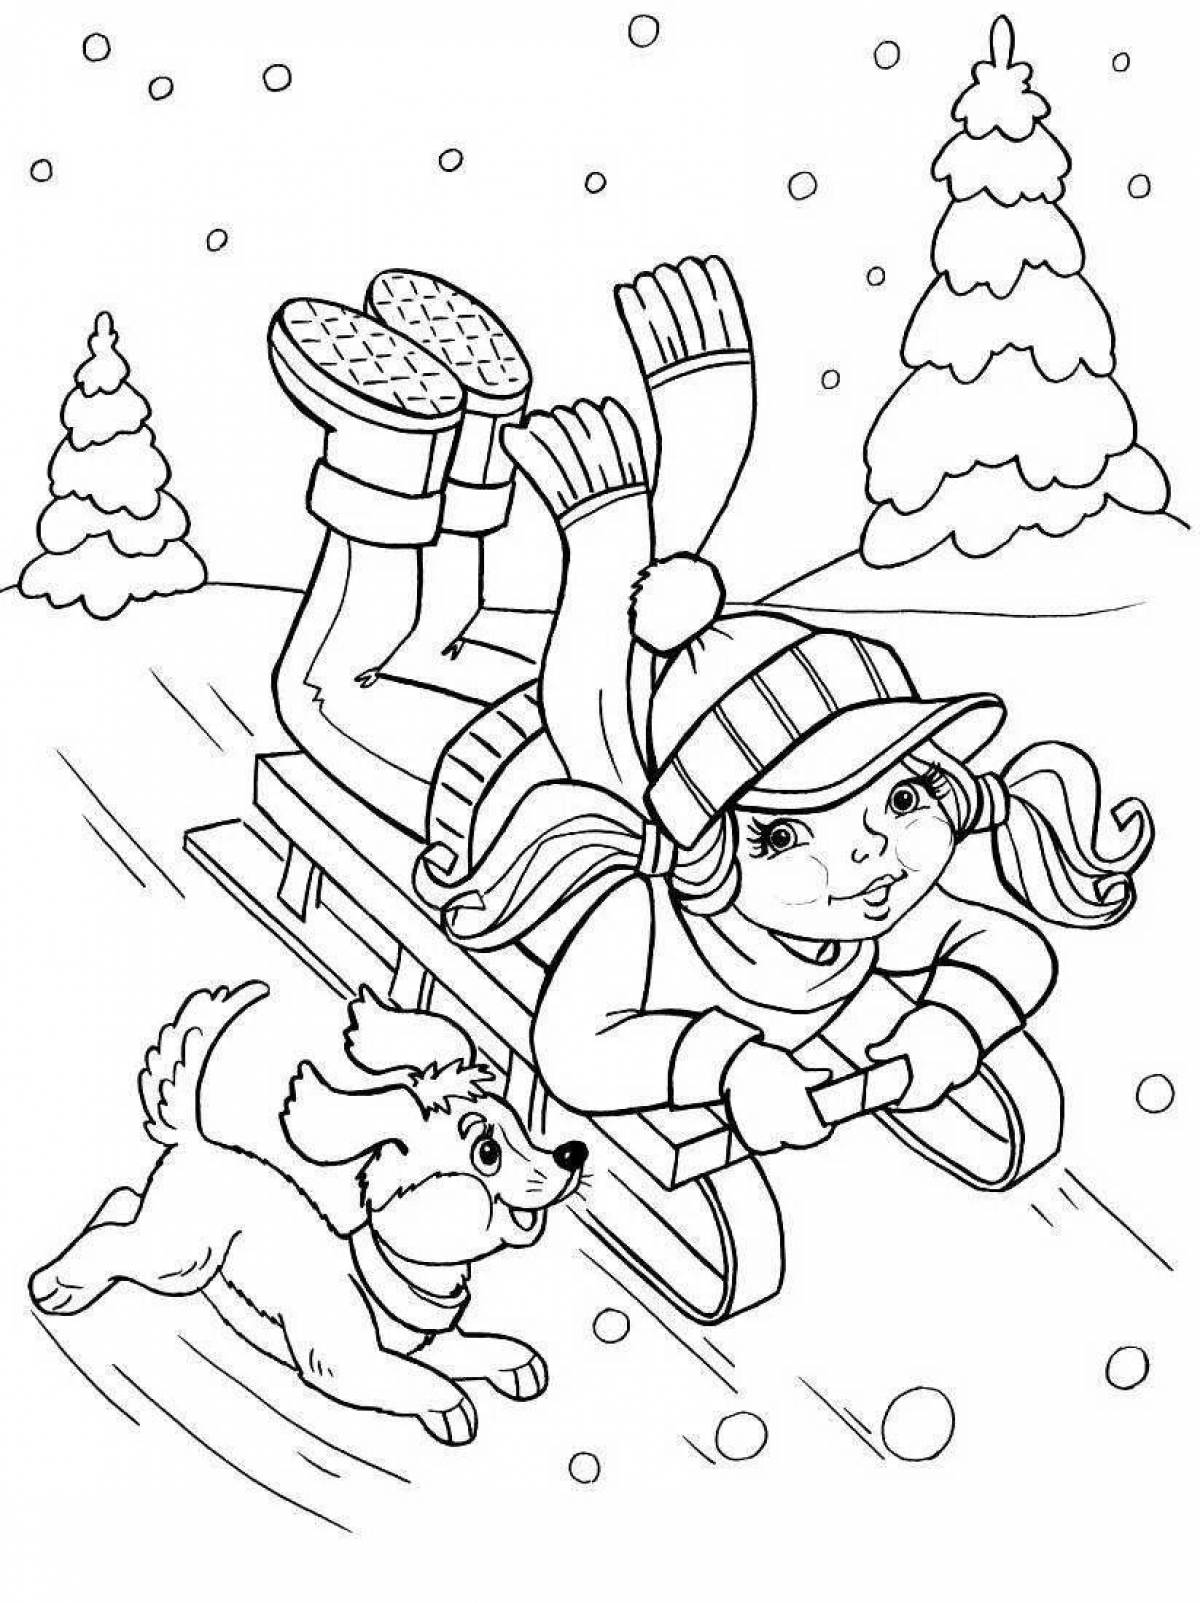 Live winter coloring book